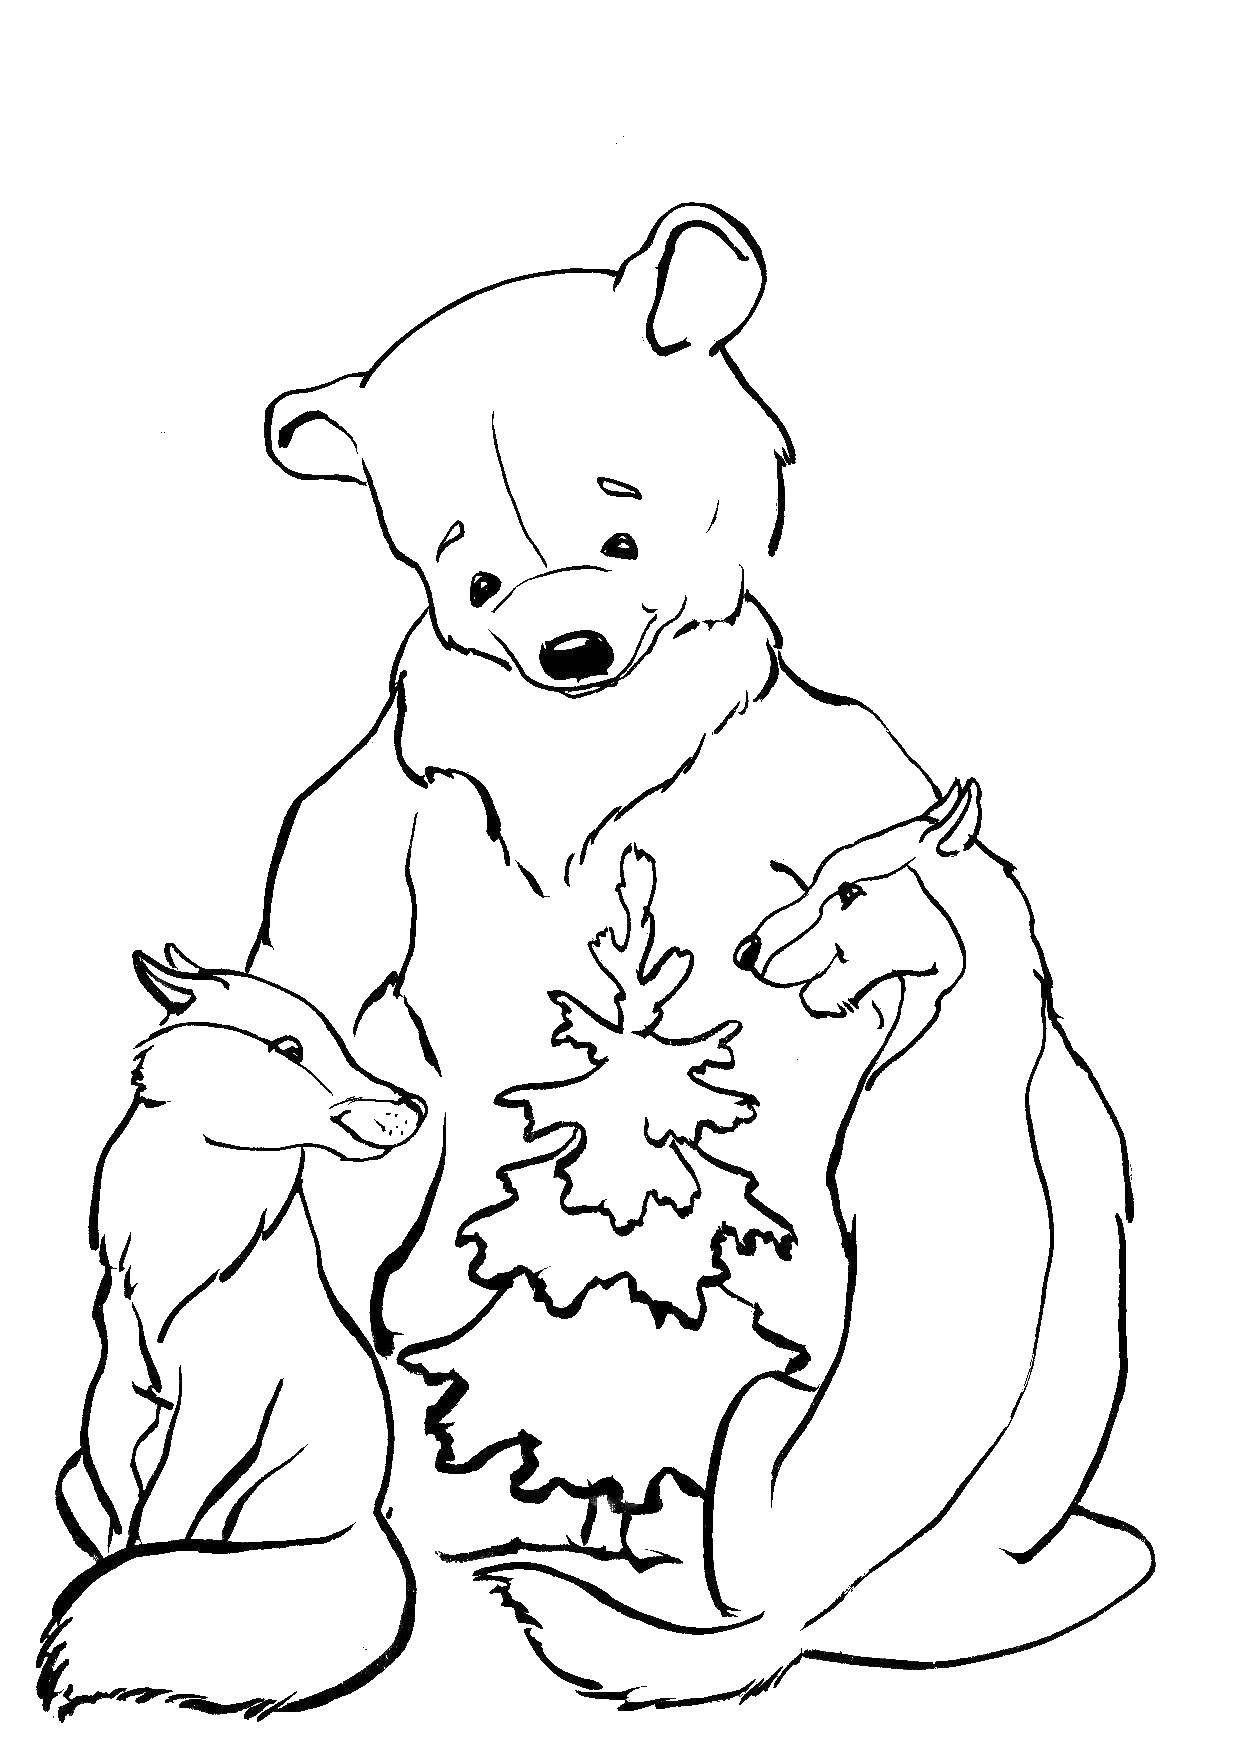 Coloring Wolves and bears. Category Animals. Tags:  wolves, bears.